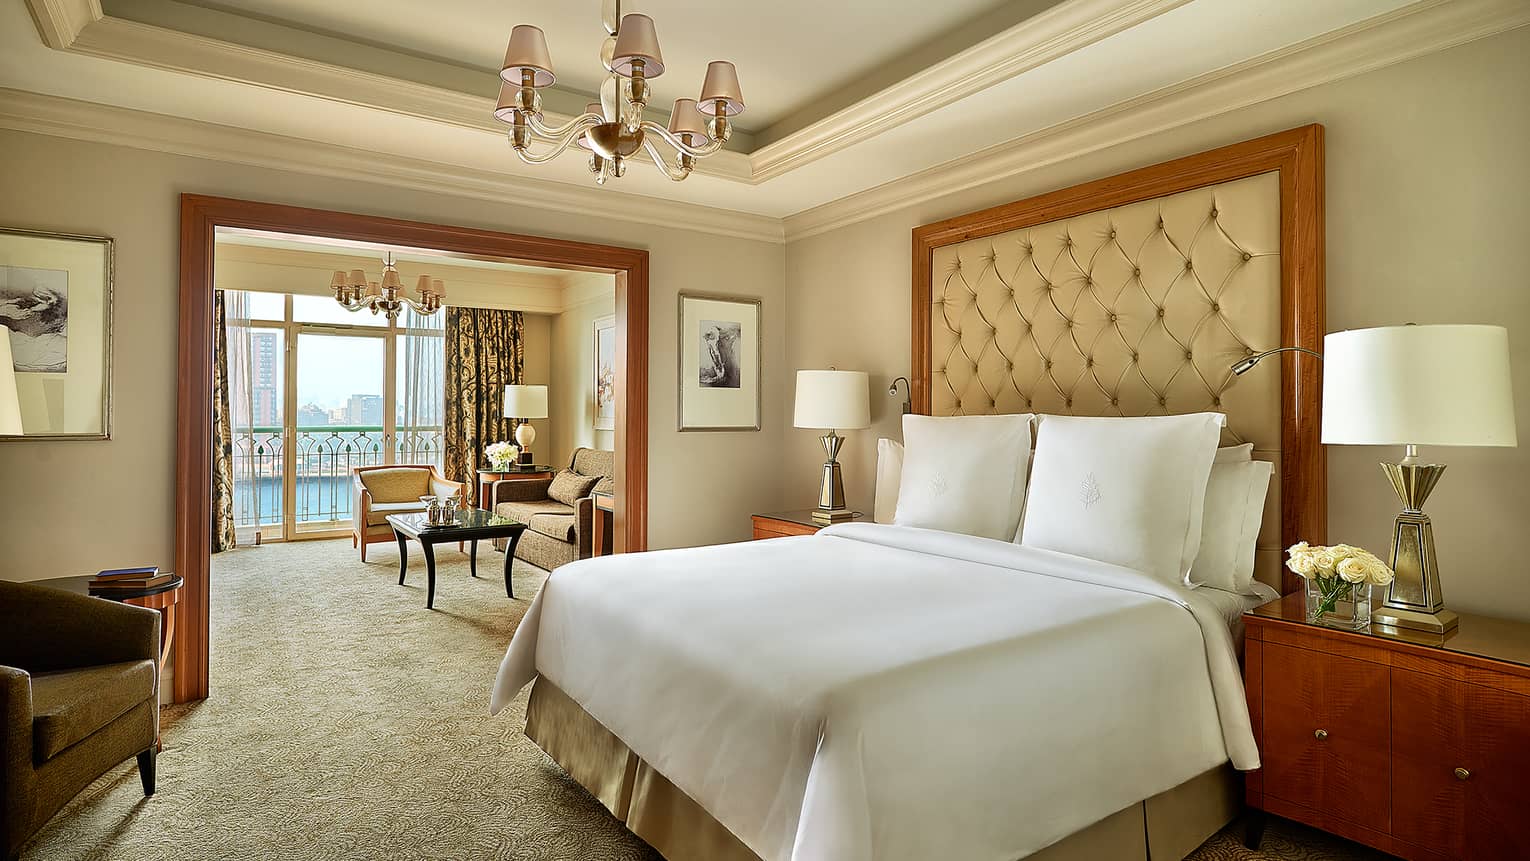 Premier Nile Room bedroom with cream and white tones, bed, high leather headboard, adjoining living room